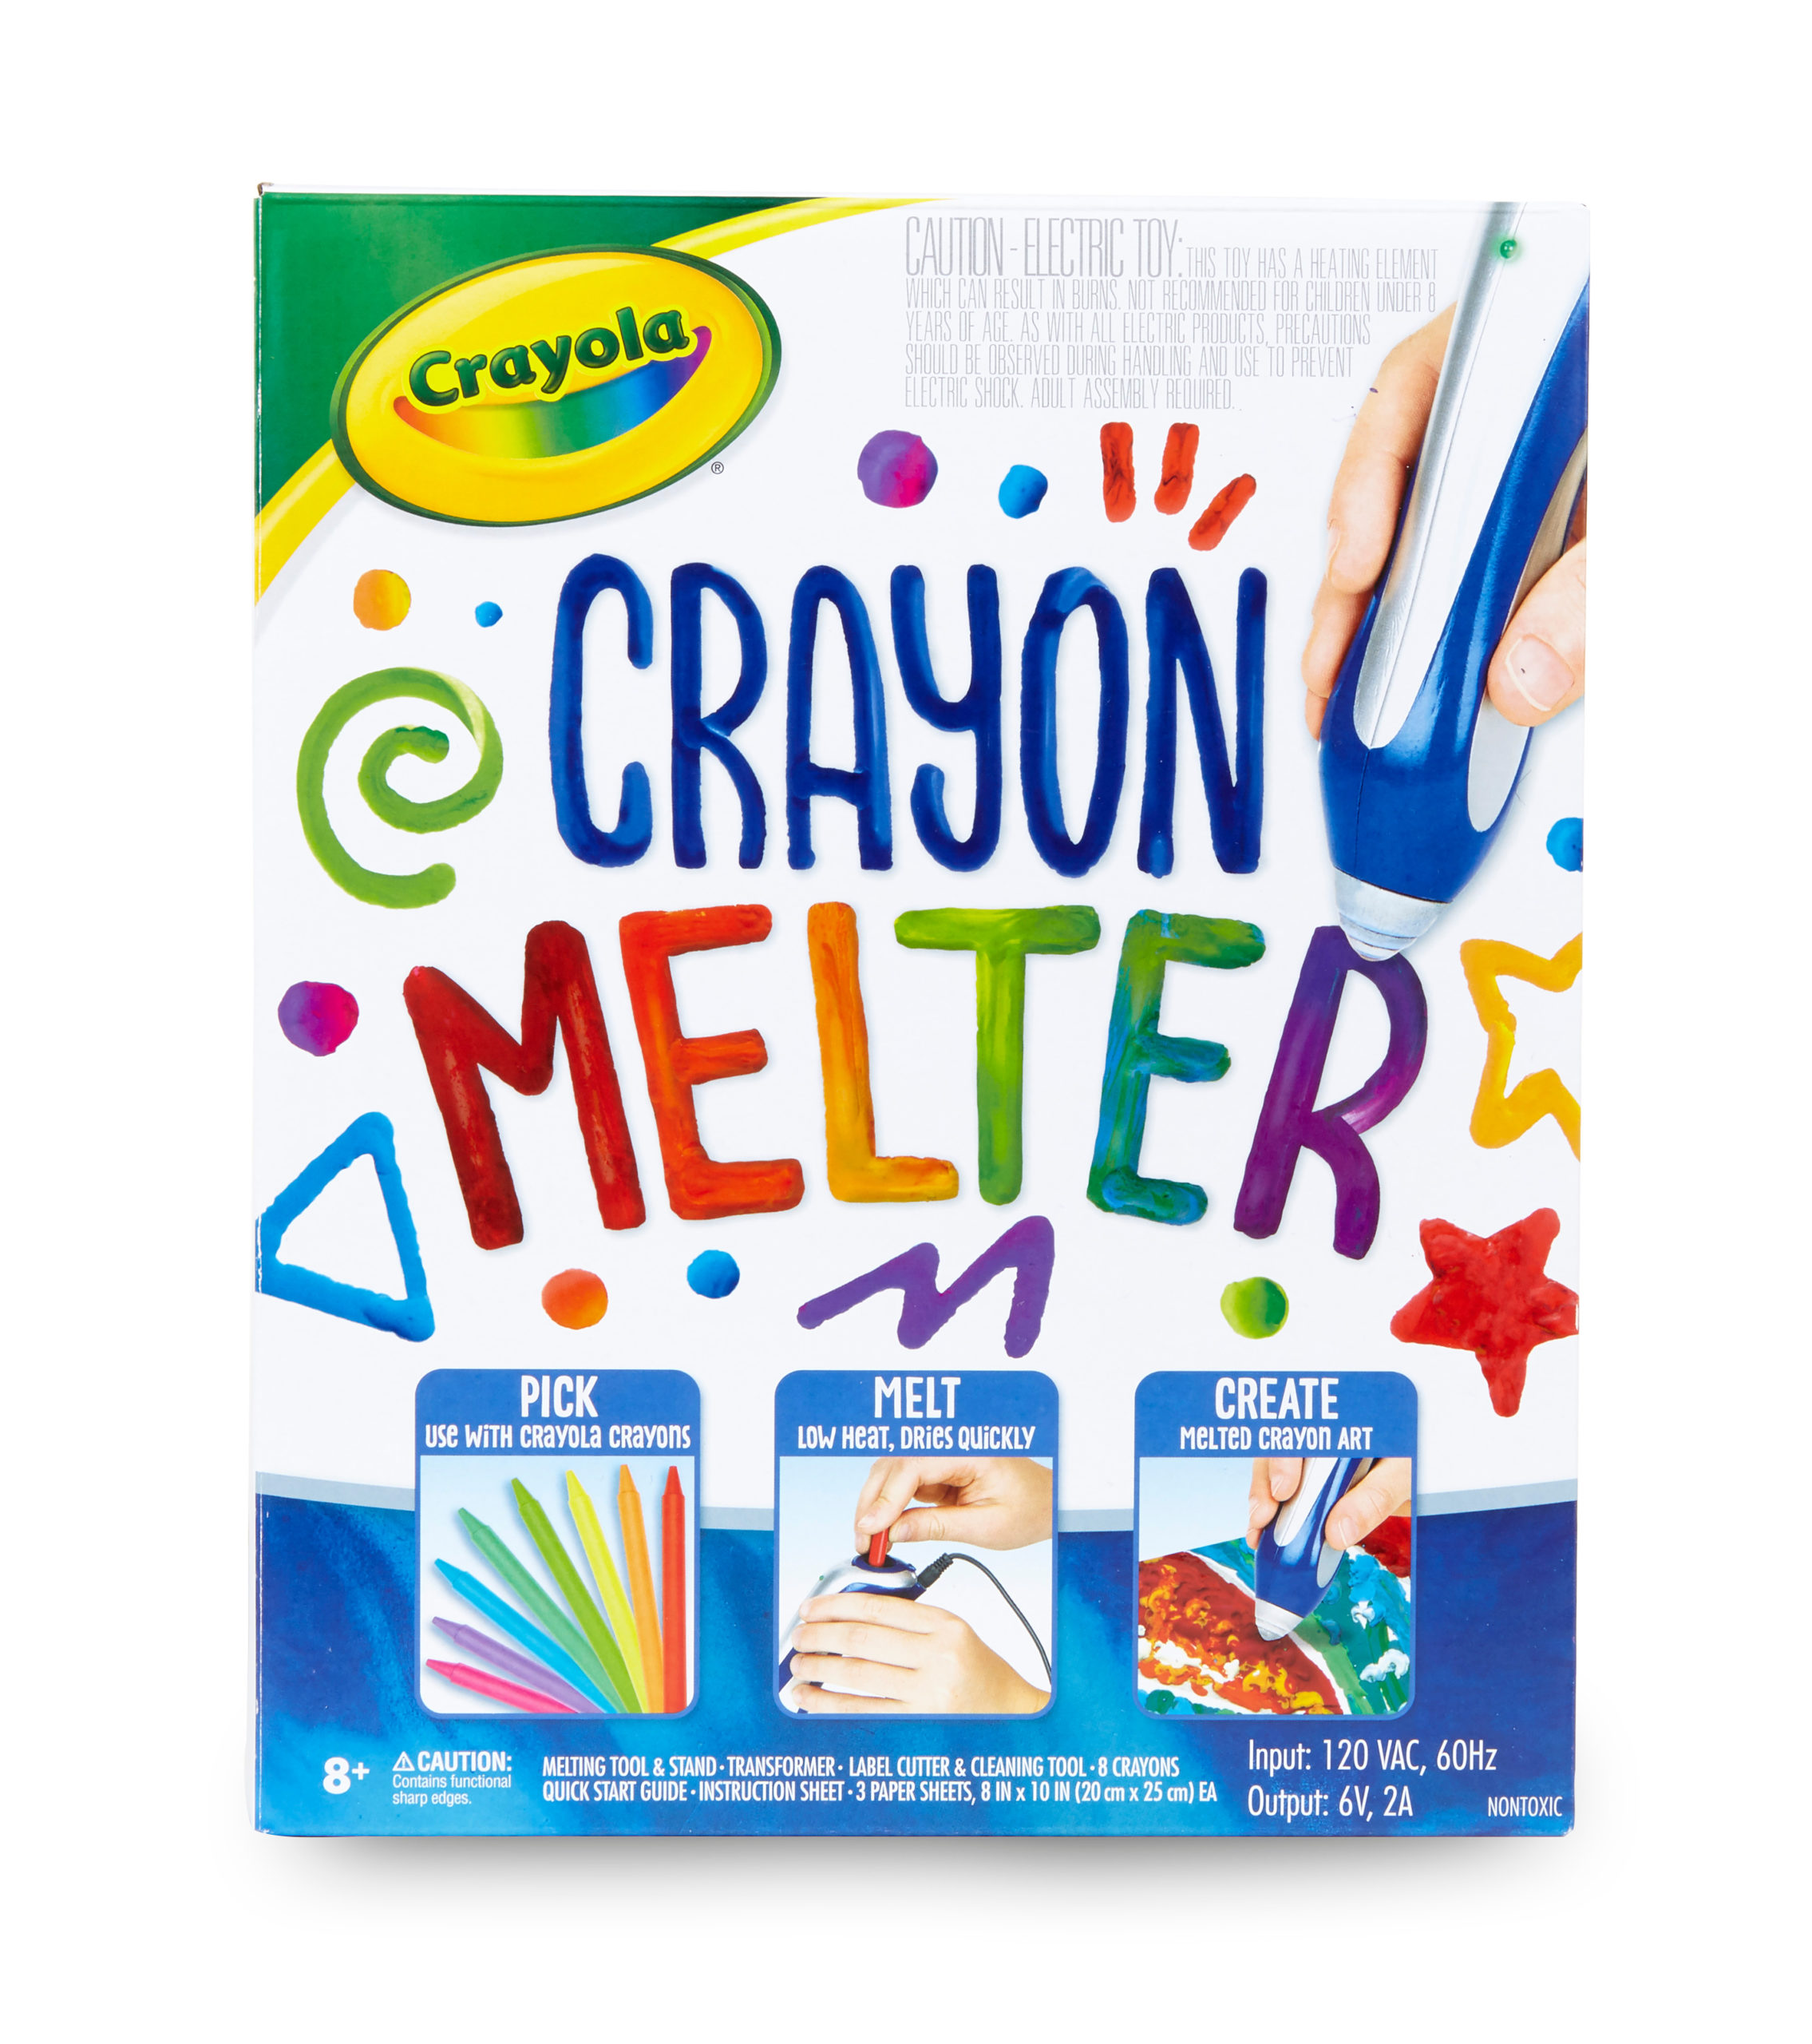 Crayola Crayon Melter Kit with Crayons, Gift for Kids, Unisex Child